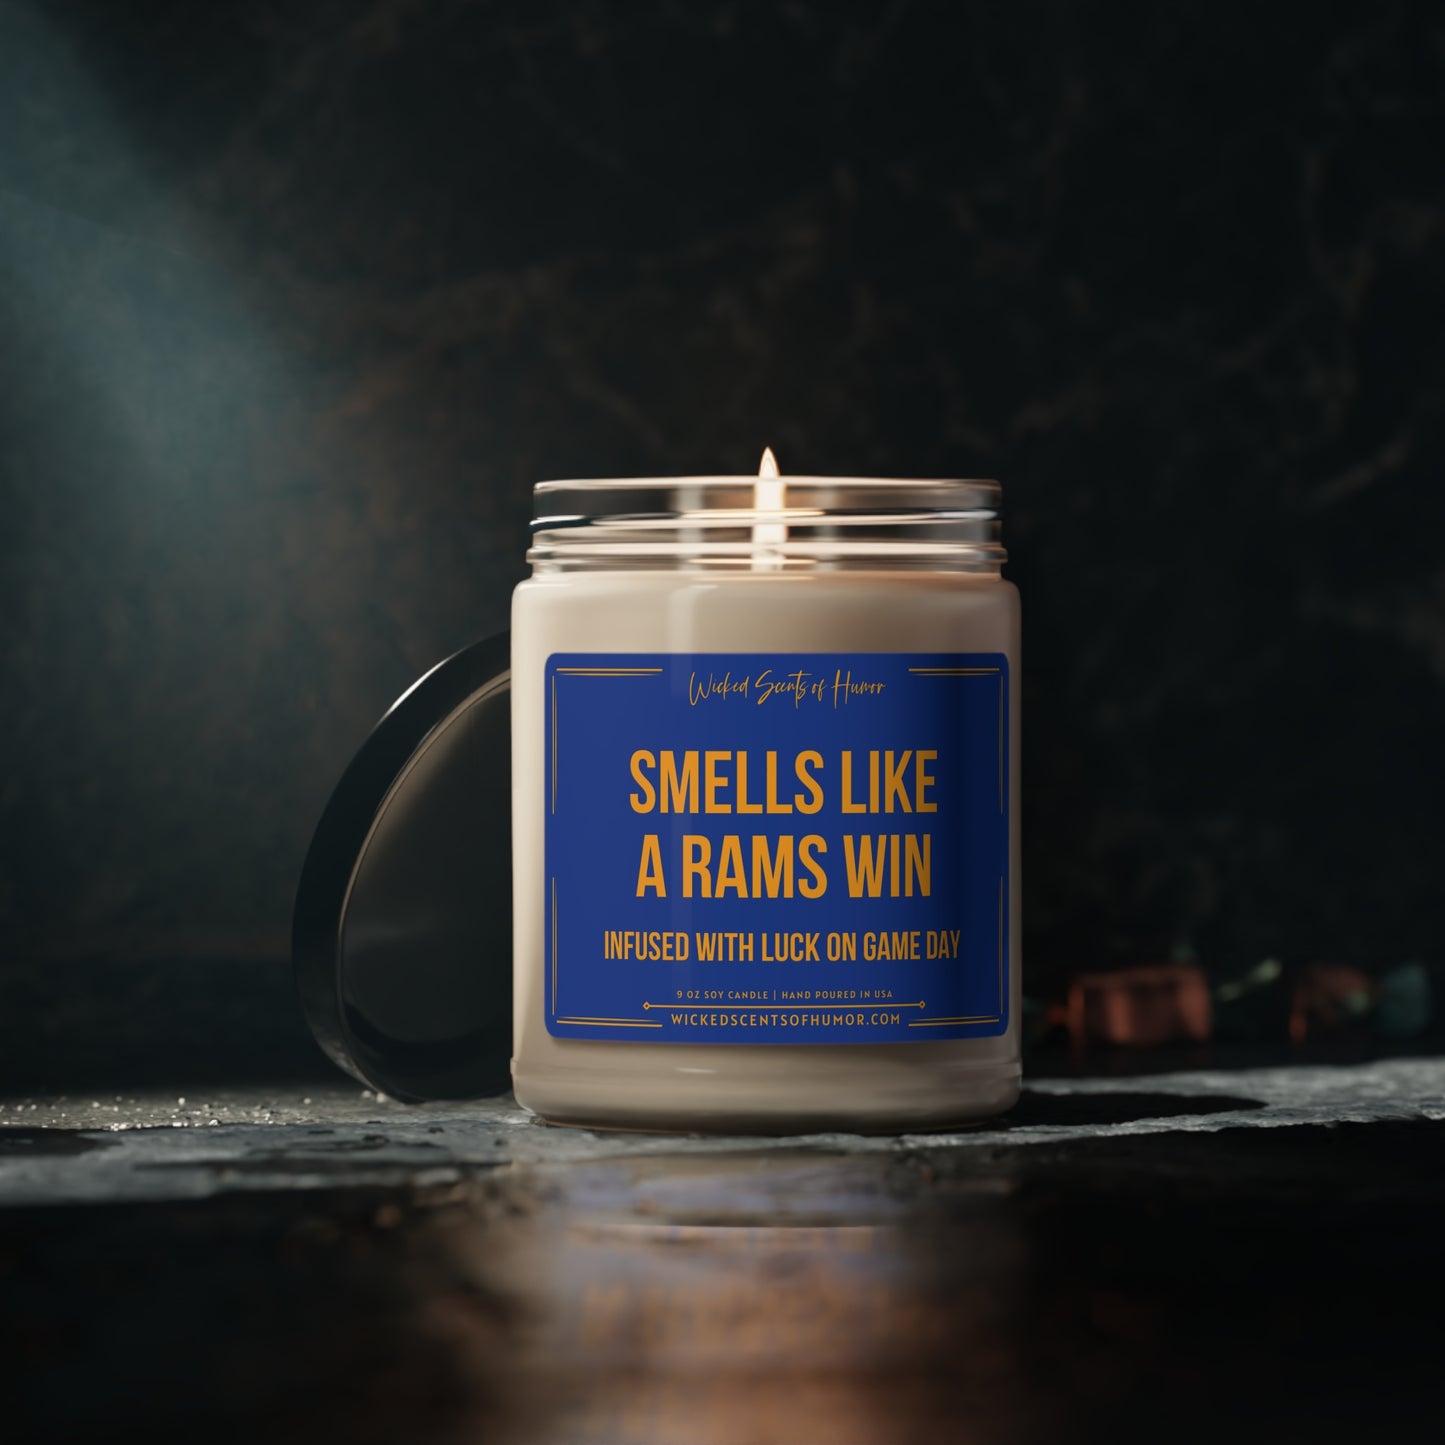 Smells Like A Rams Win Candle, Unique Gift Idea, Los Angeles Rams Gift Candle, NFL Rams Candle, Game Day Decor, Sport Themed Candle